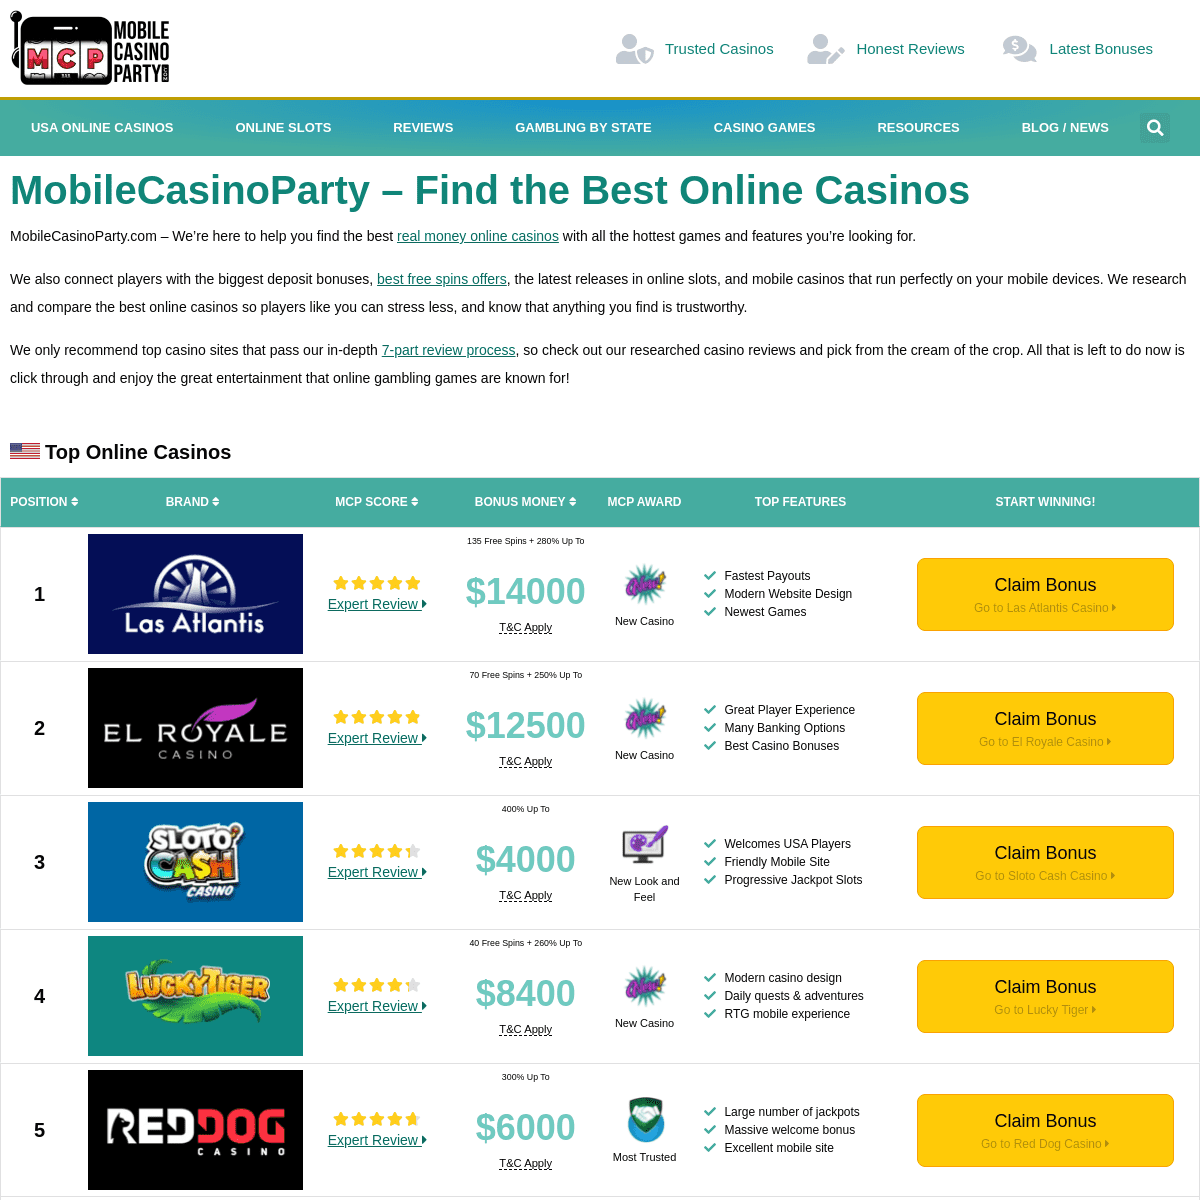 A complete backup of https://mobilecasinoparty.com